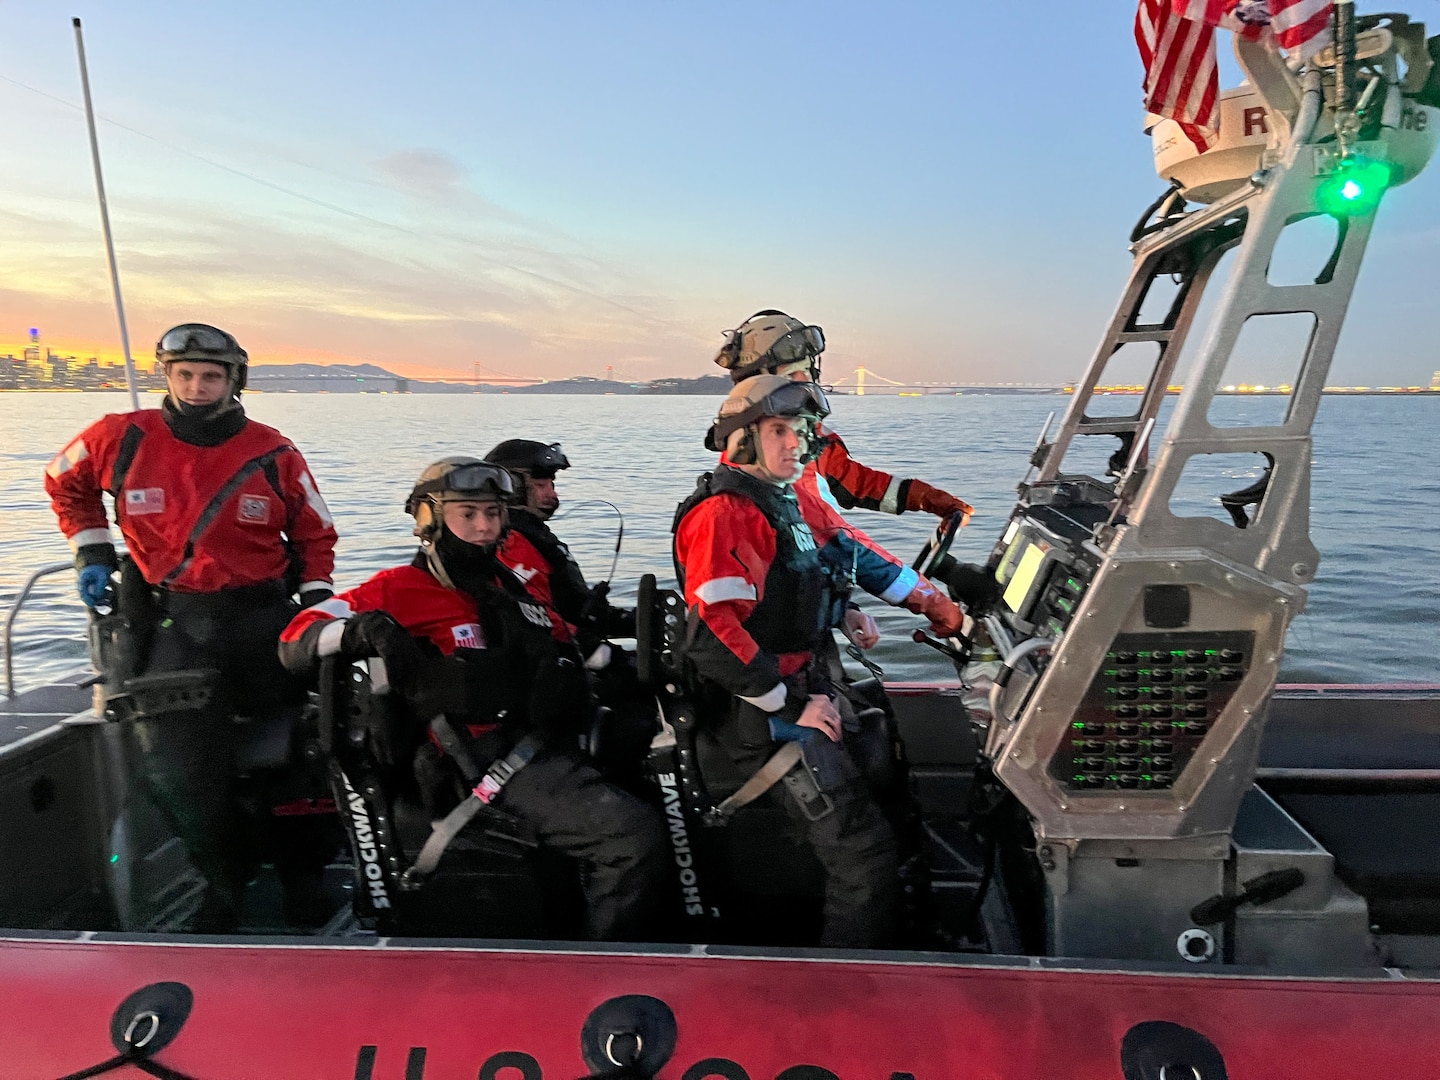 In January 2023, crews aboard an over-the-horizon boat from Maritime Safety and Security Team San Francisco evaluate a proposed boat crew communications system supporting the Research and Development Center, Defense Innovation Unit and C5I Service Center Team, who won the Commander Joel Magnussen Innovation Award for Management.